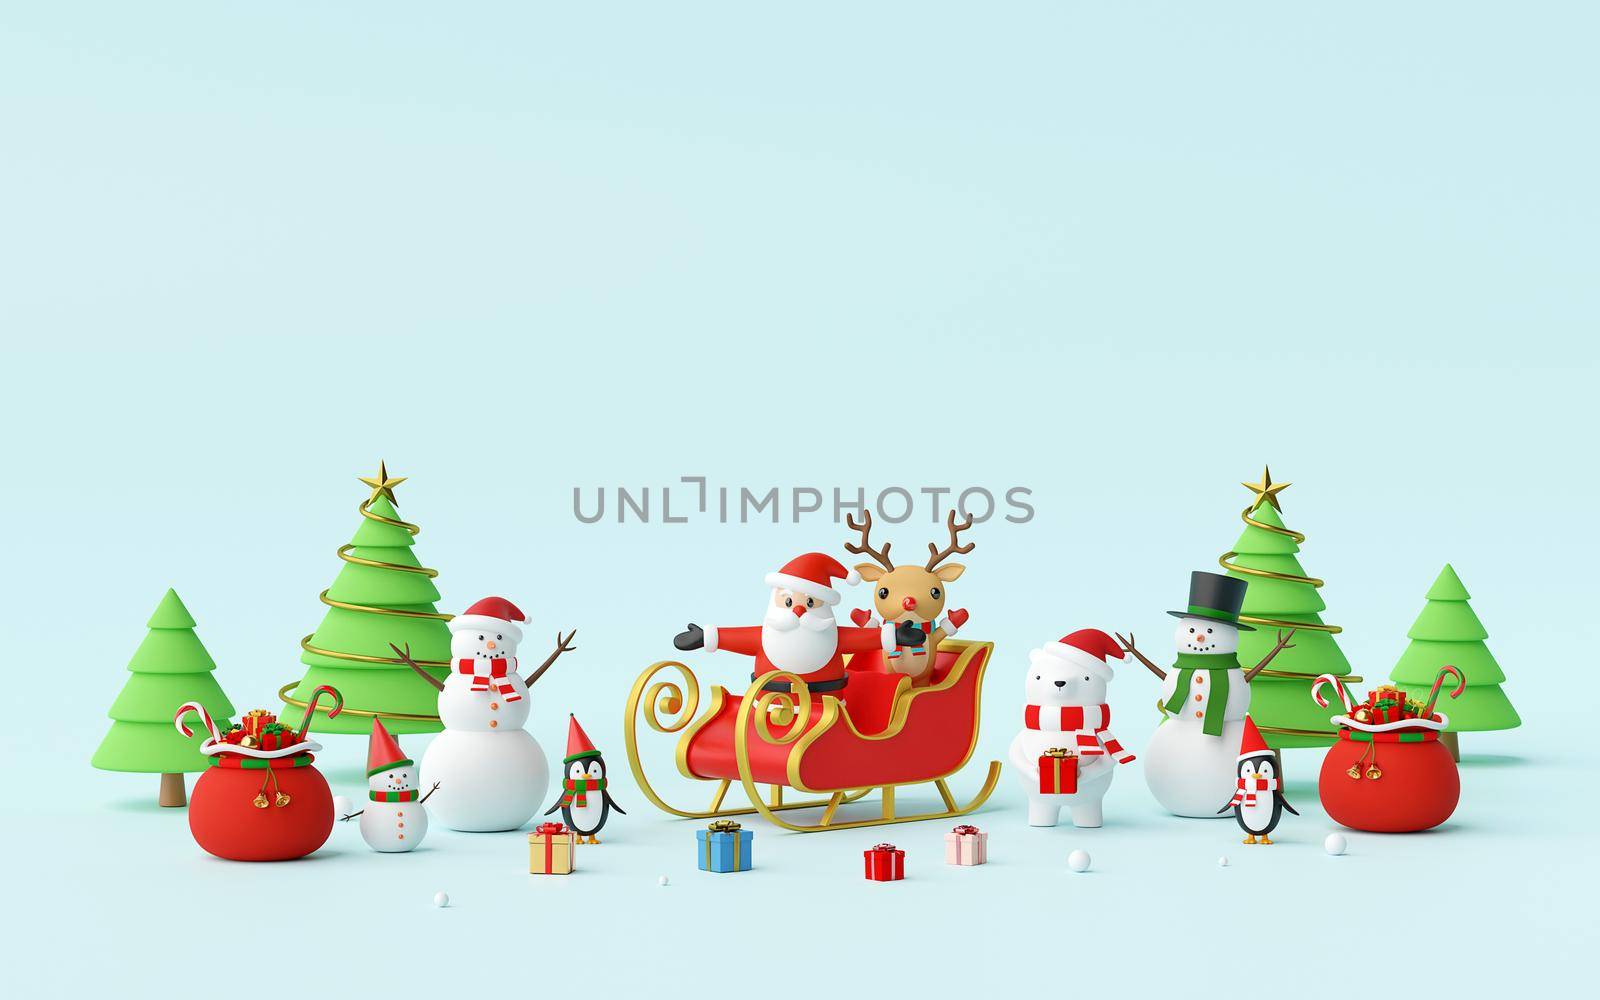 Merry Christmas and Happy New Year, Scene of Christmas celebrate with Santa Claus and friends, 3d rendering